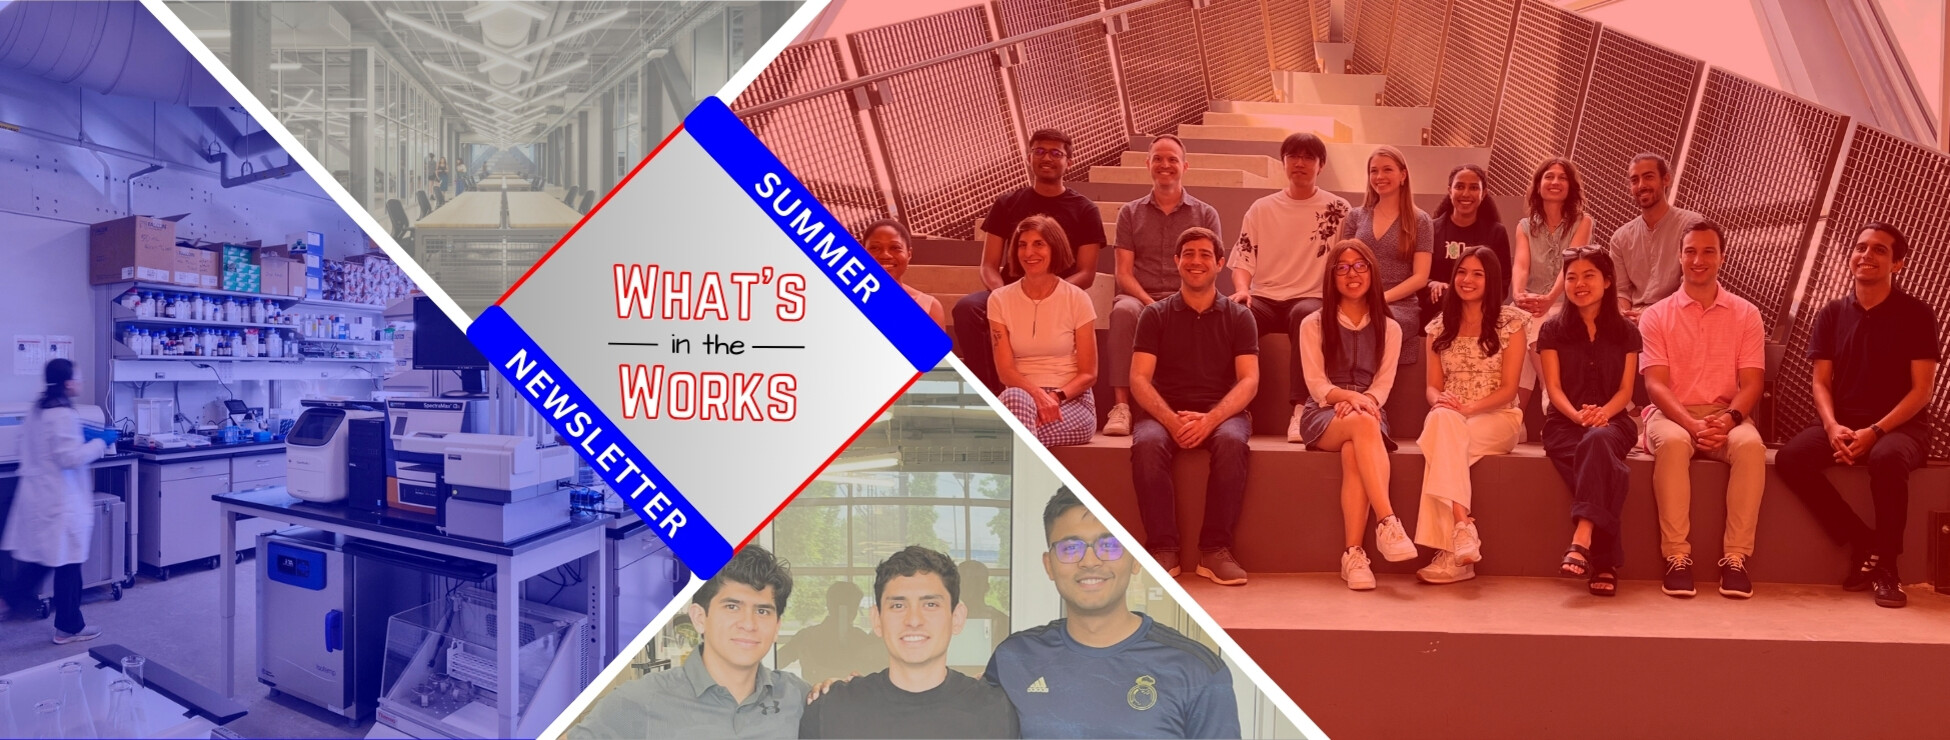 Pennovation Works Newsletter -What's in the Works - photo collage of accelerator cohort, Sahay AI member spotlight, and available garage and lab spaces